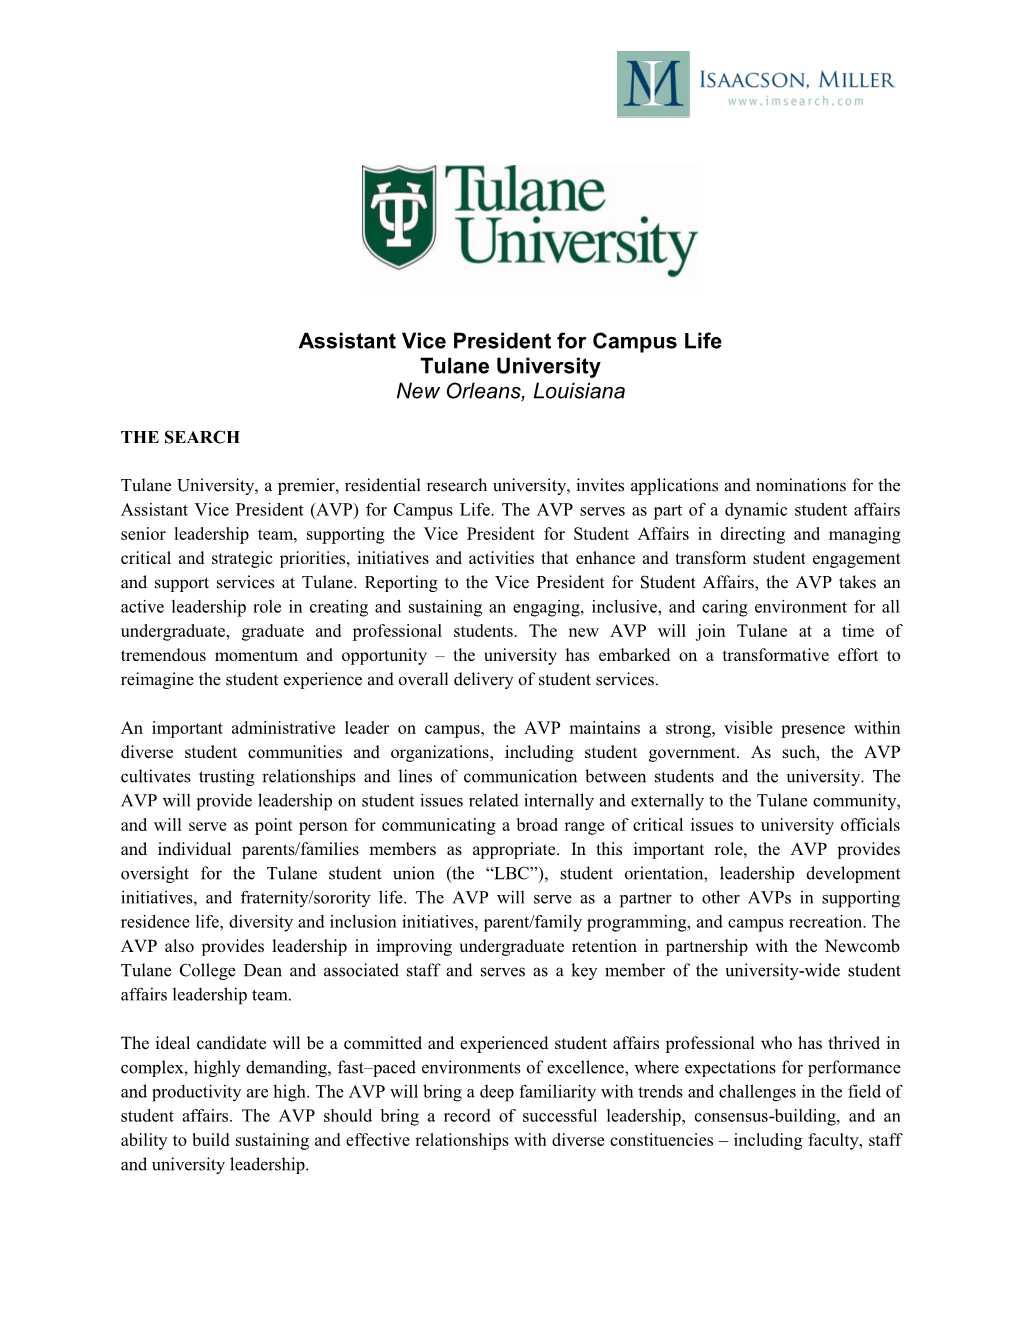 Assistant Vice President for Campus Life Tulane University New Orleans, Louisiana